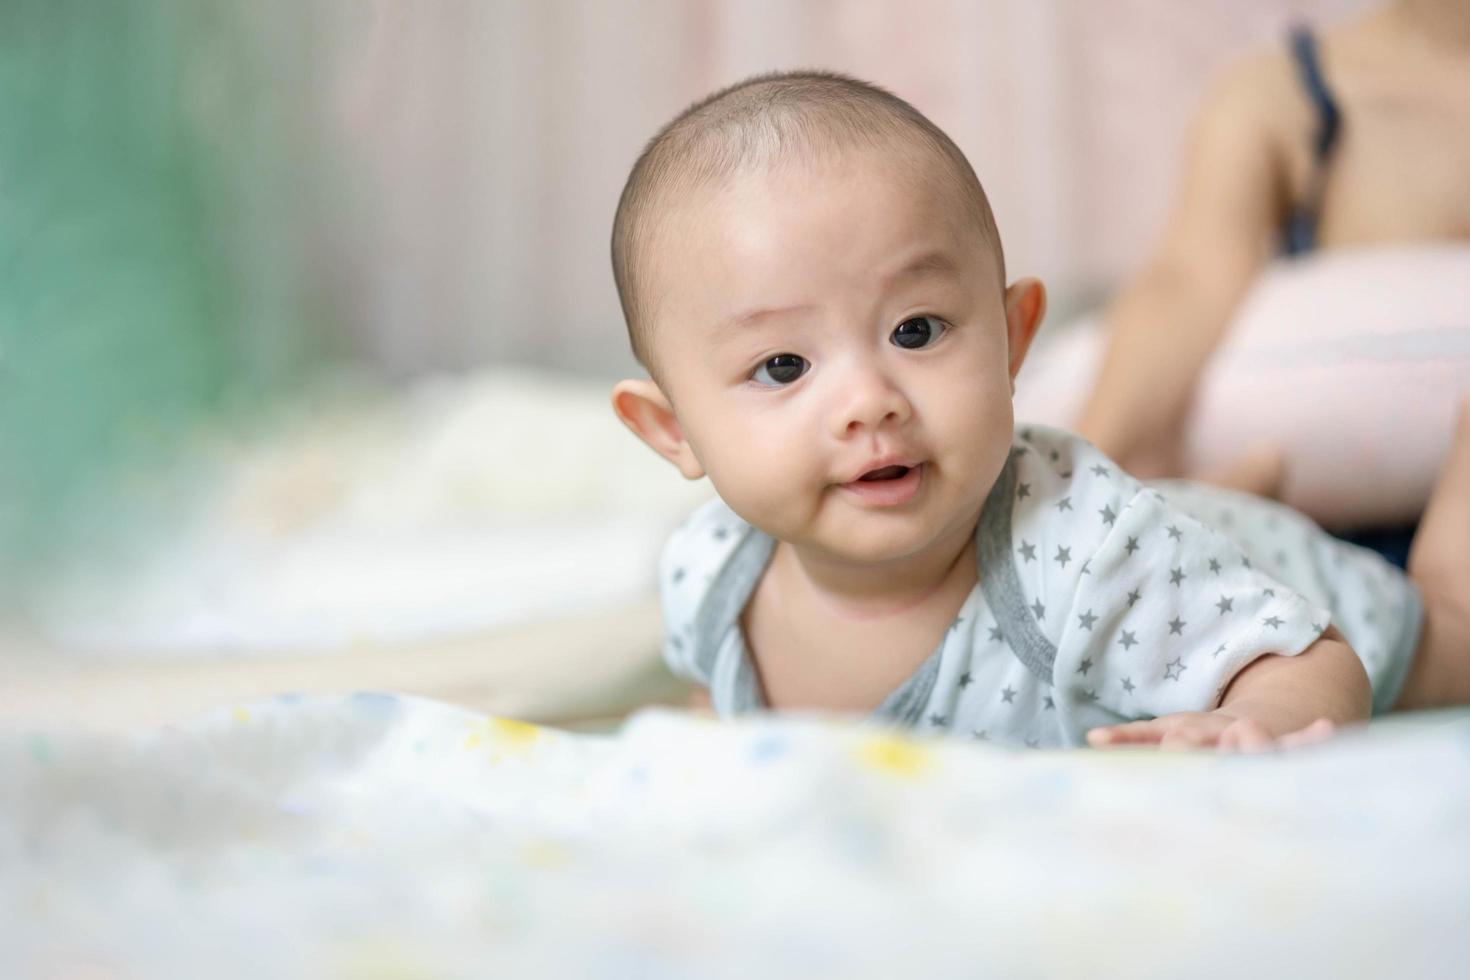 Happy family, Cute Asian newborn baby lying play on bed looking at something. While your mother takes care with love nearby. Innocent little boy on the first day of his life. Mother's Day concept. photo